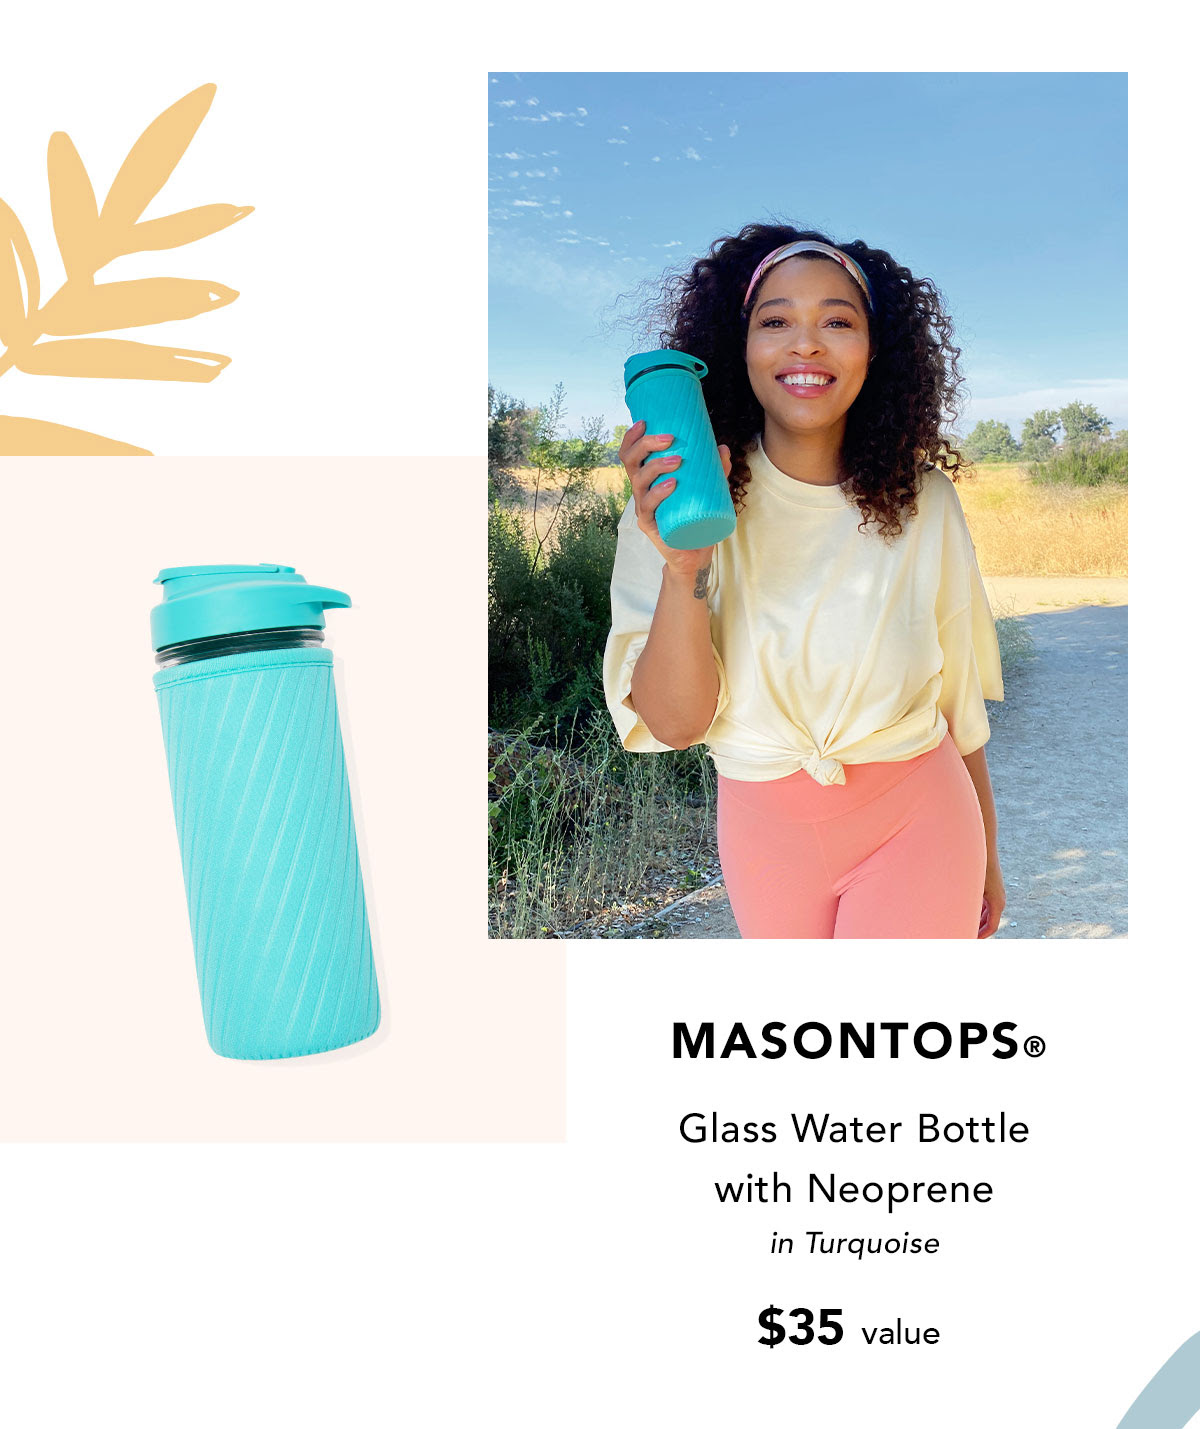 Masontops® Glass Water Bottle with Neoprene in Turquoise $35 value